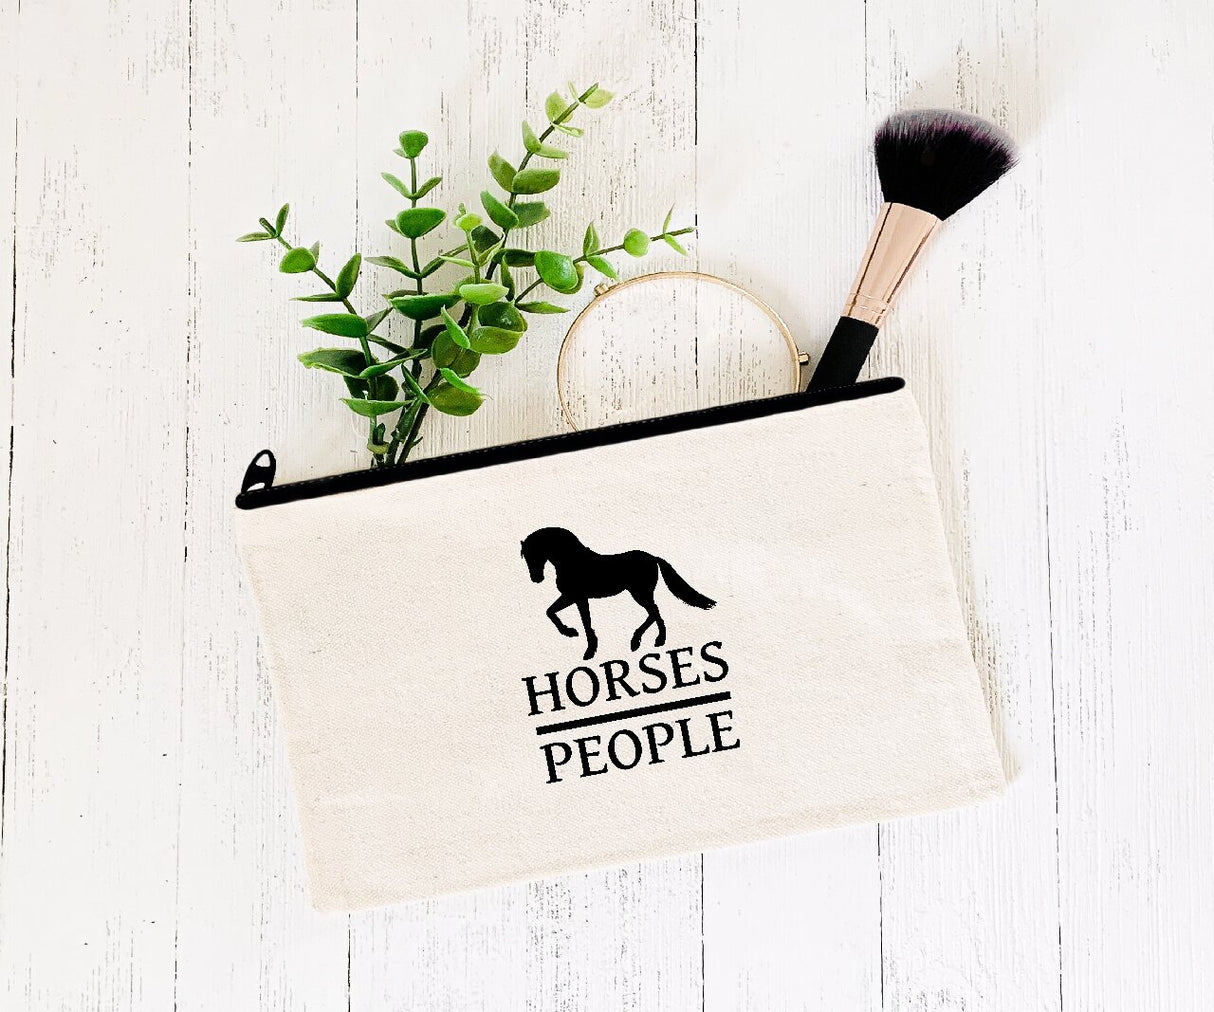 Horses Over People - Zipper Bags for Cosmetics, Pencils or Show Cash